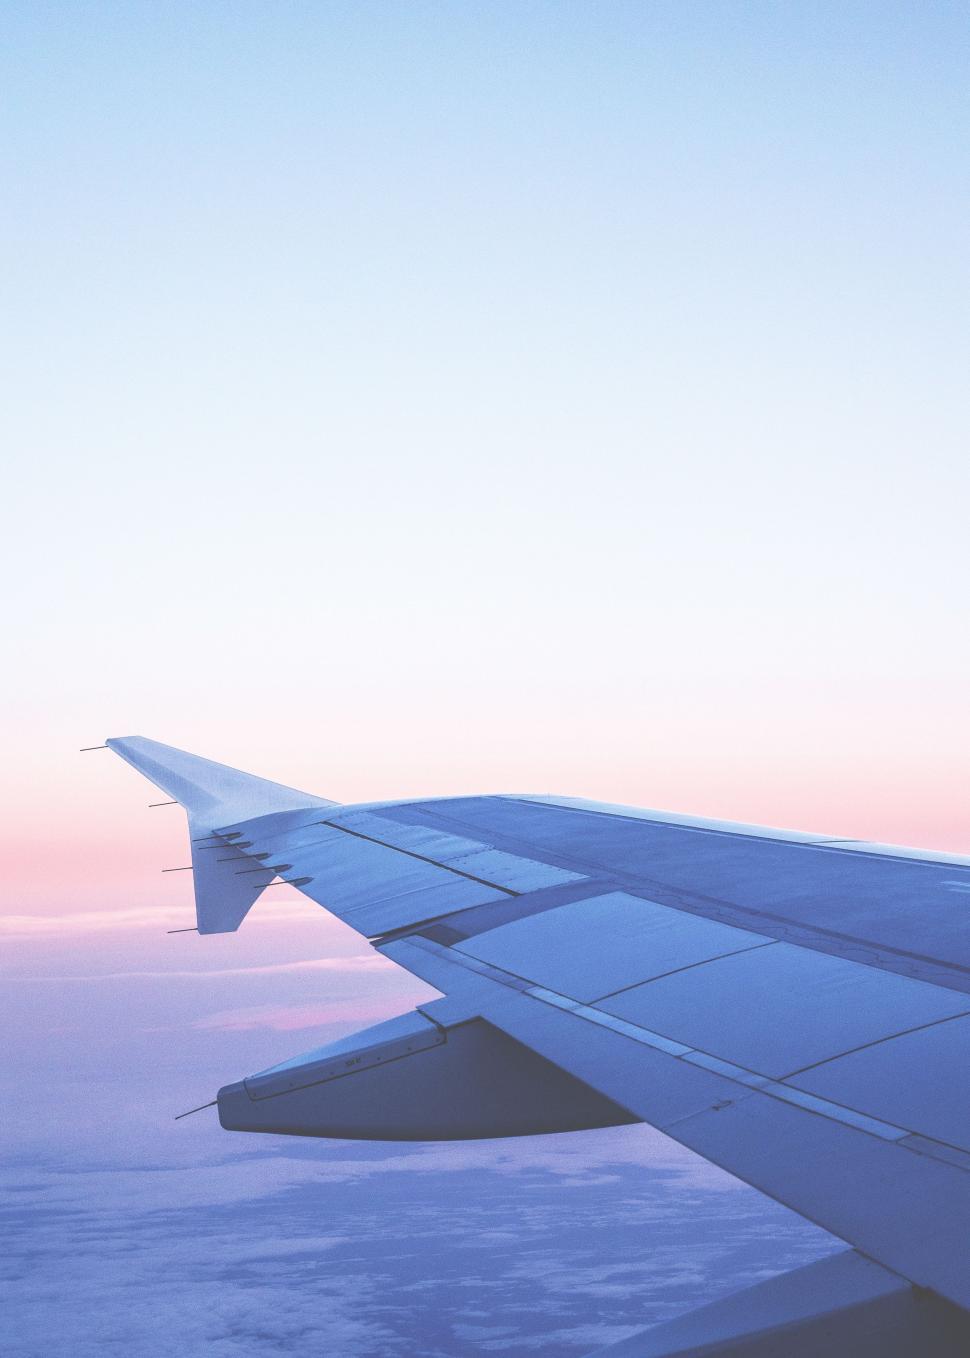 Free Image of Wing of an airplane  